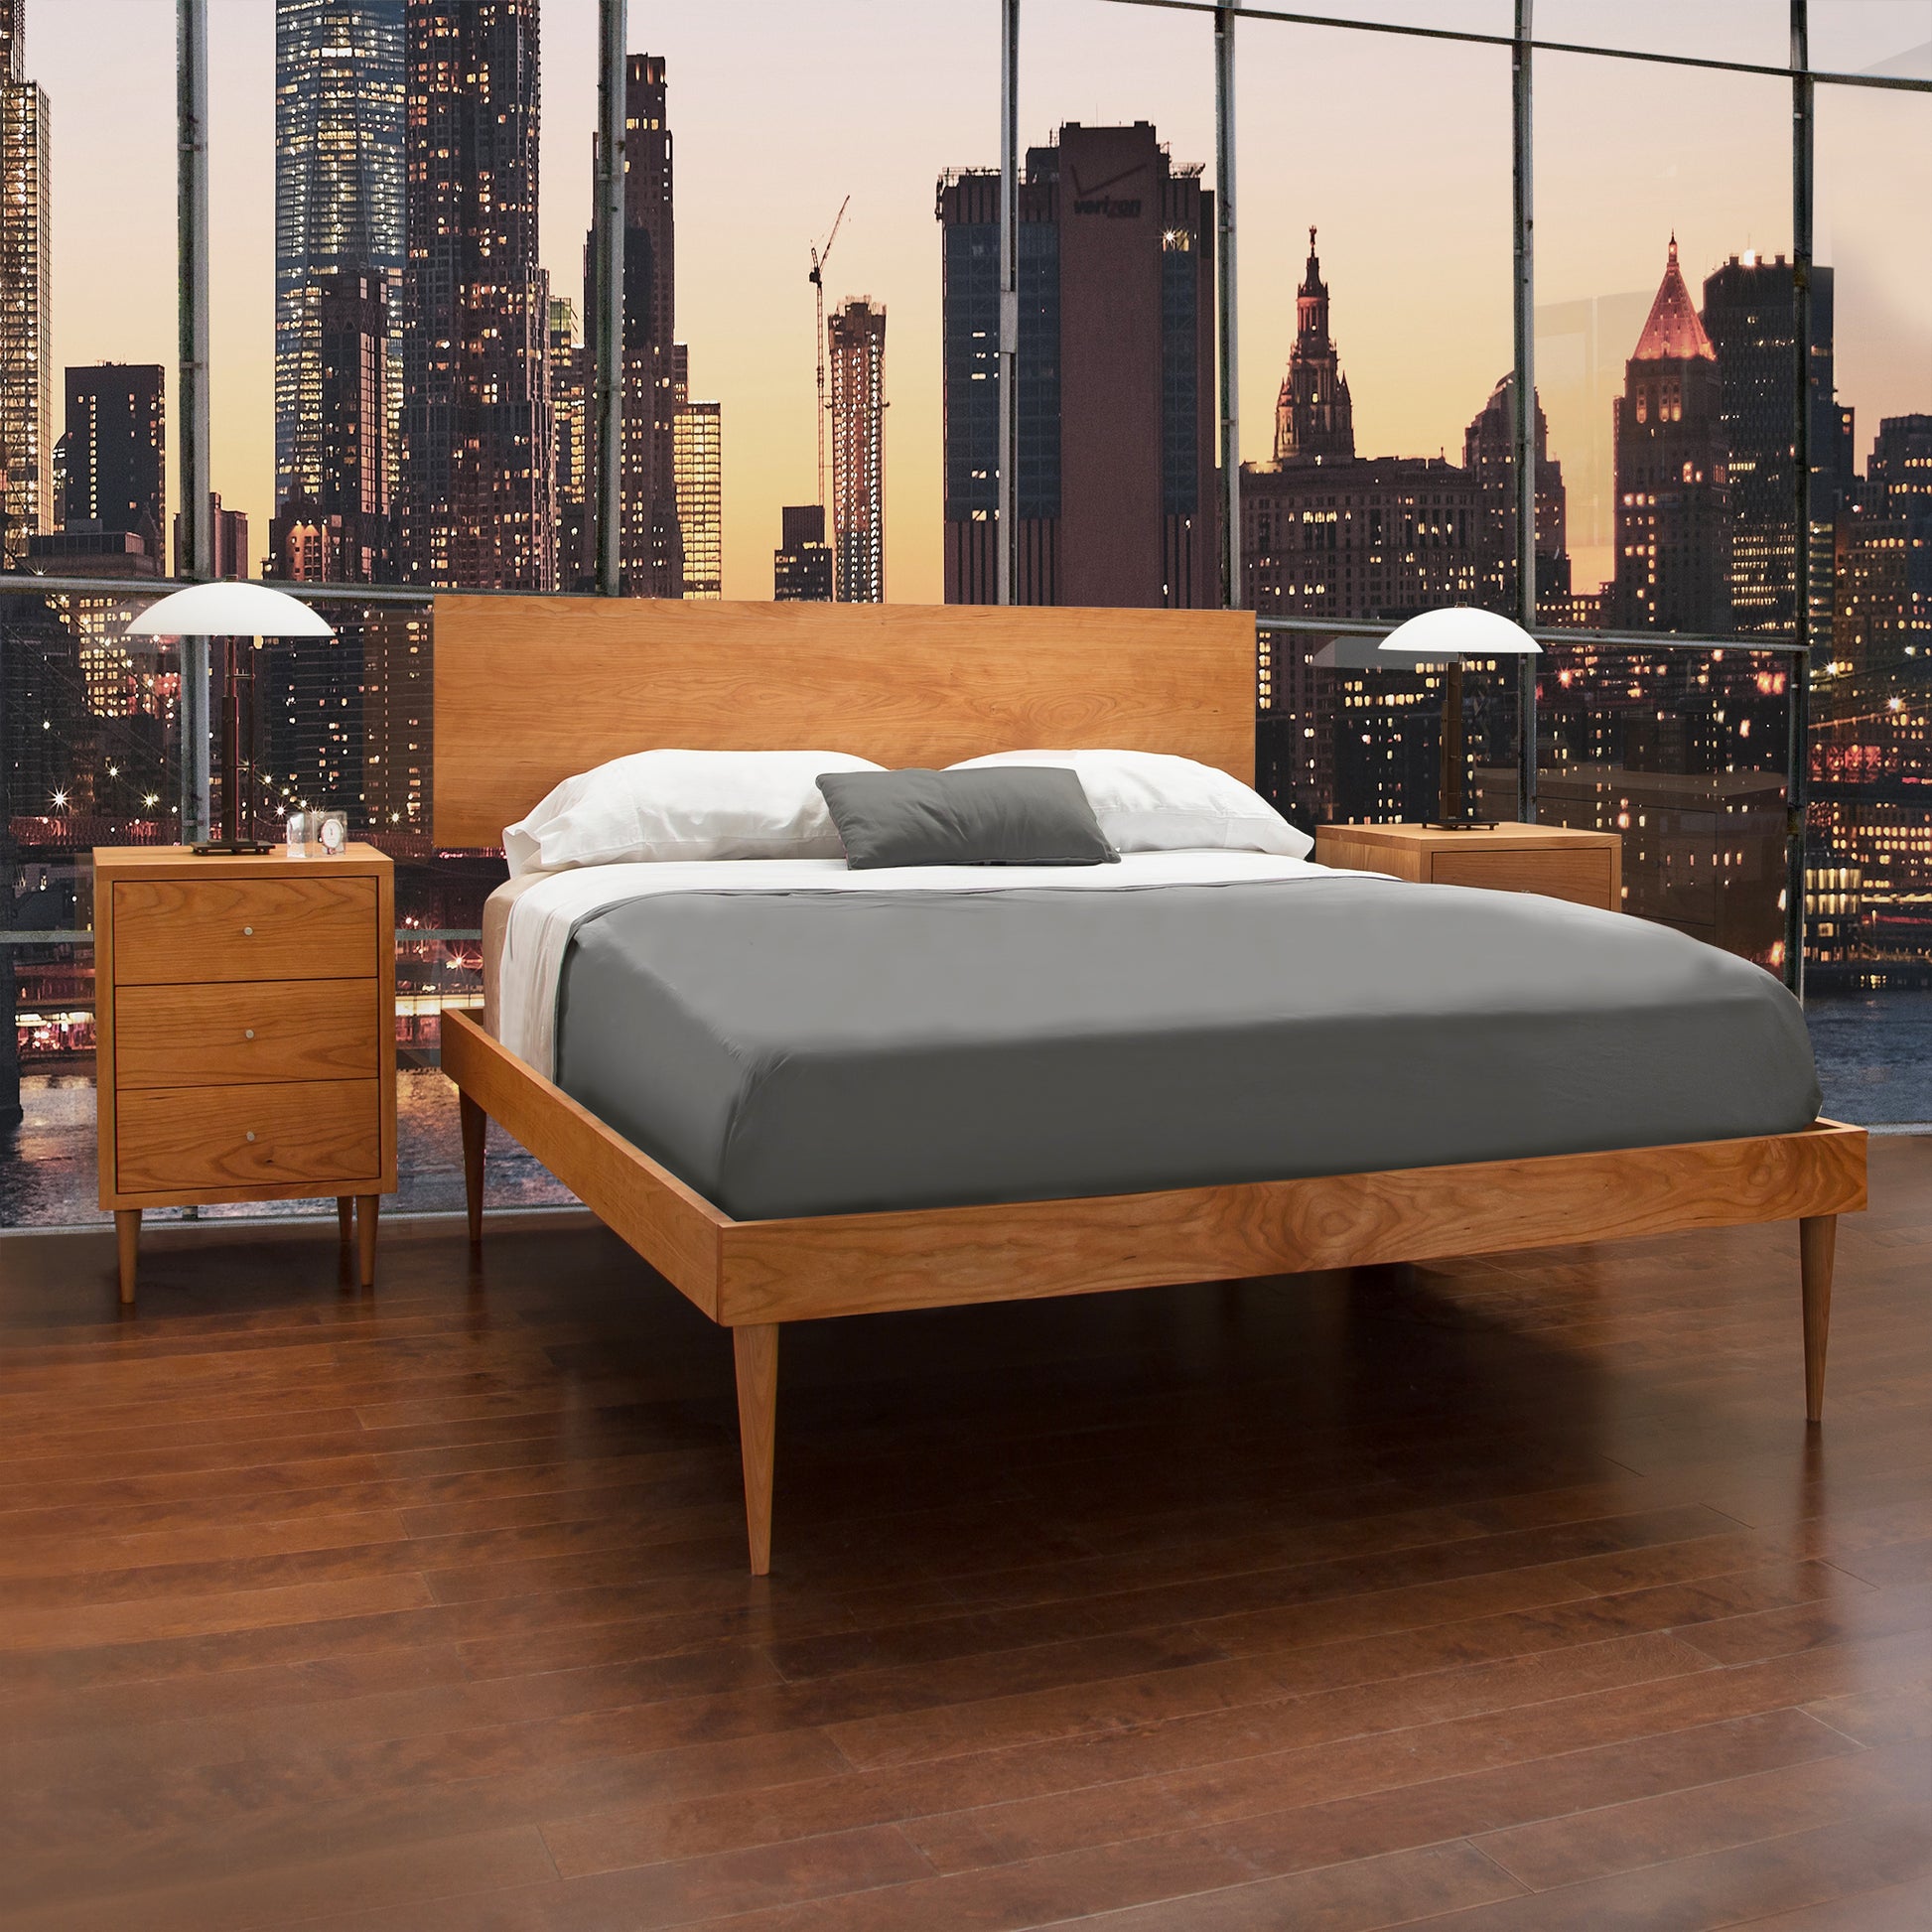 A Mid-century modern design Vermont Furniture Designs Larssen Bed with white and gray bedding set against a large window overlooking a city skyline at dusk.